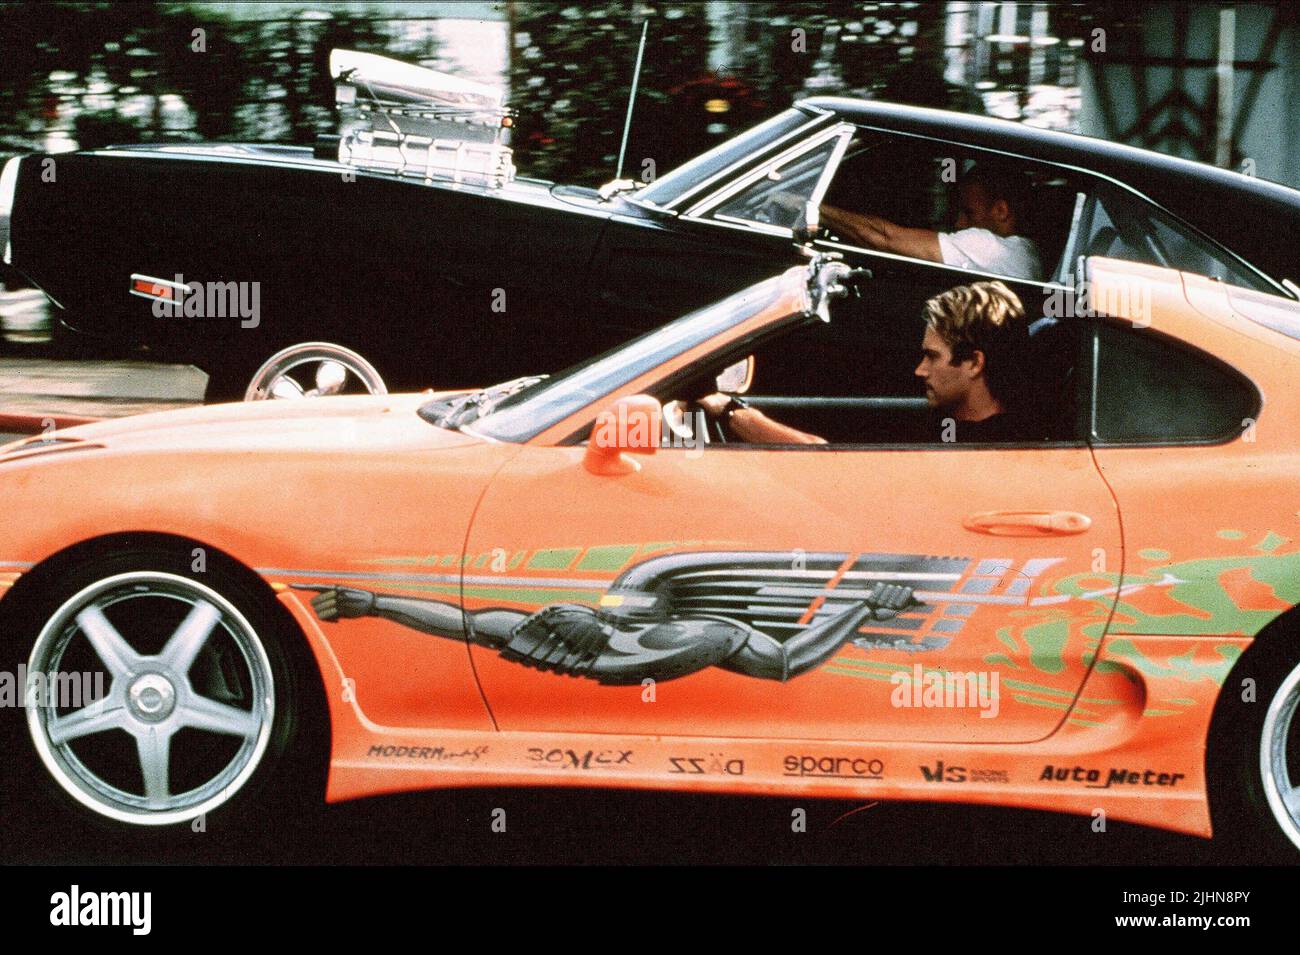 VIN DIESEL, PAUL WALKER, THE FAST AND THE FURIOUS, 2001 Stock Photo